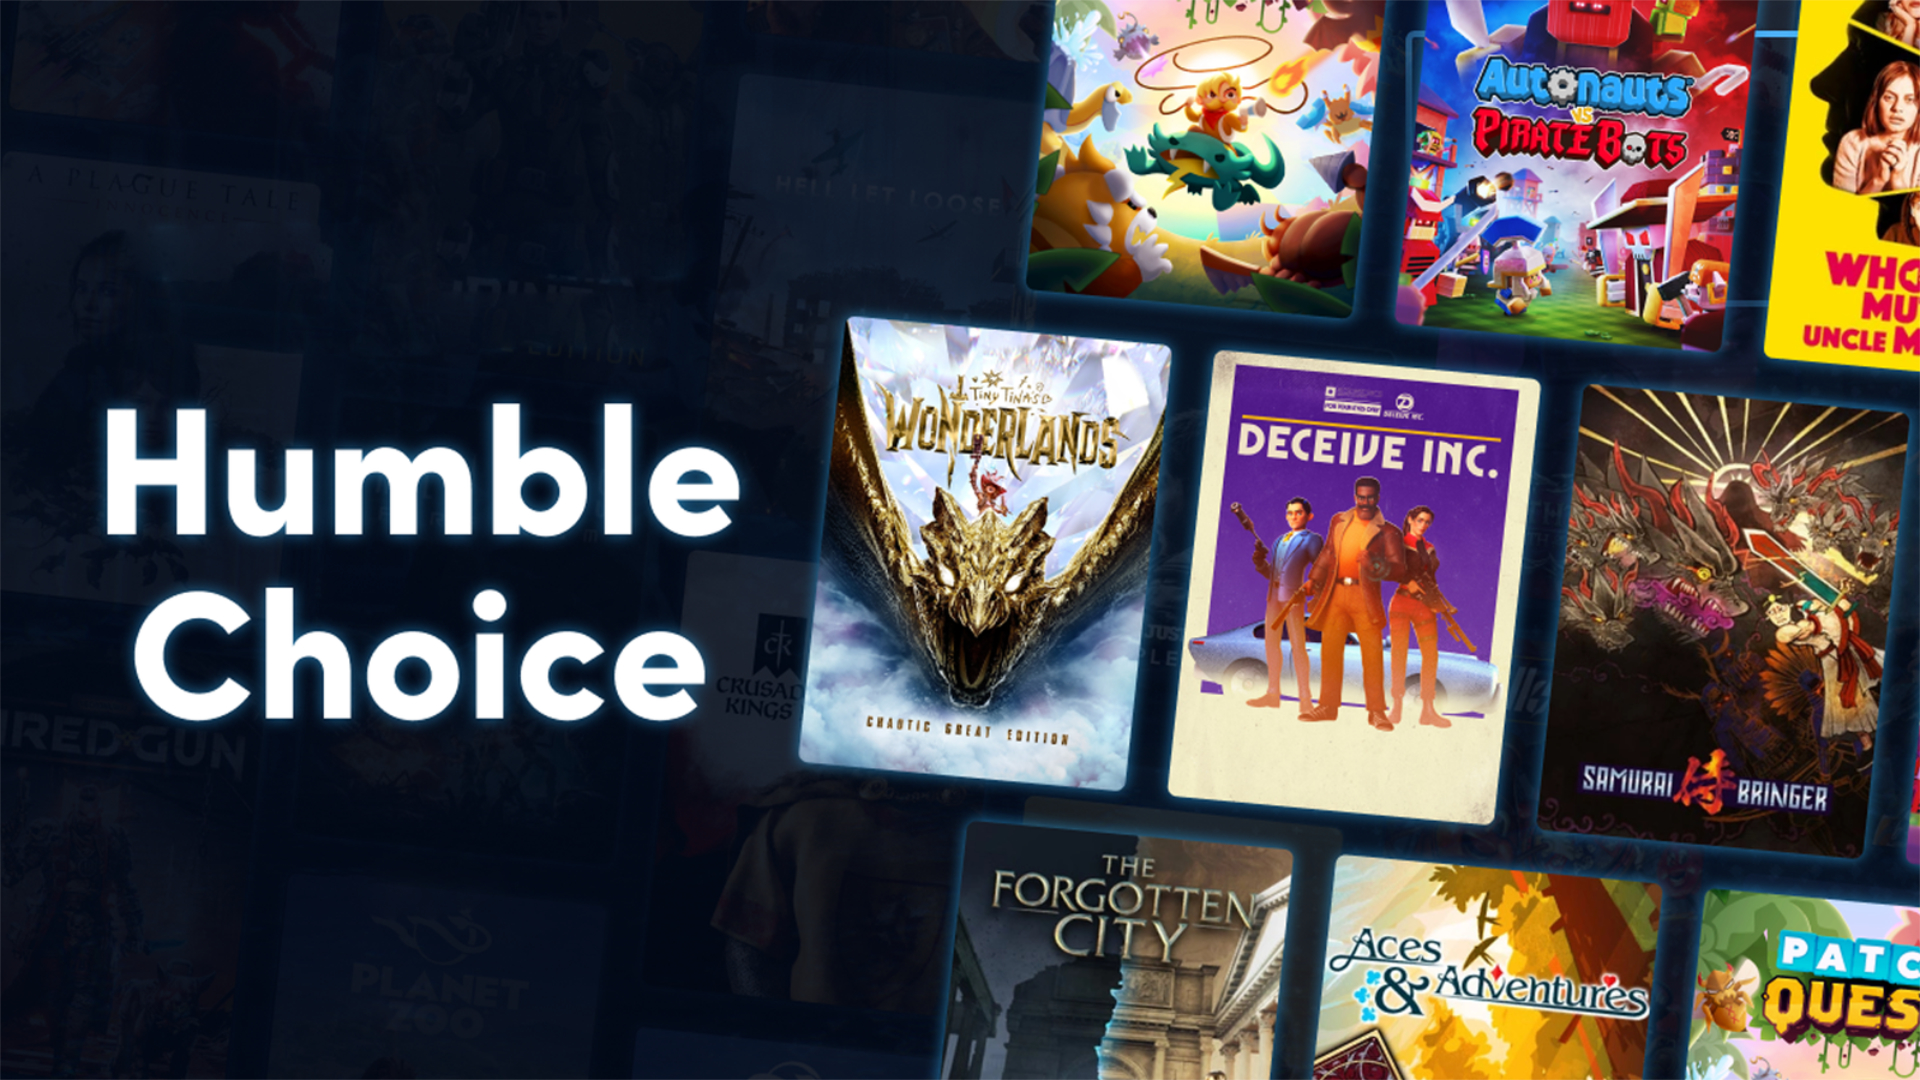 September's Humble Choice reigns supreme